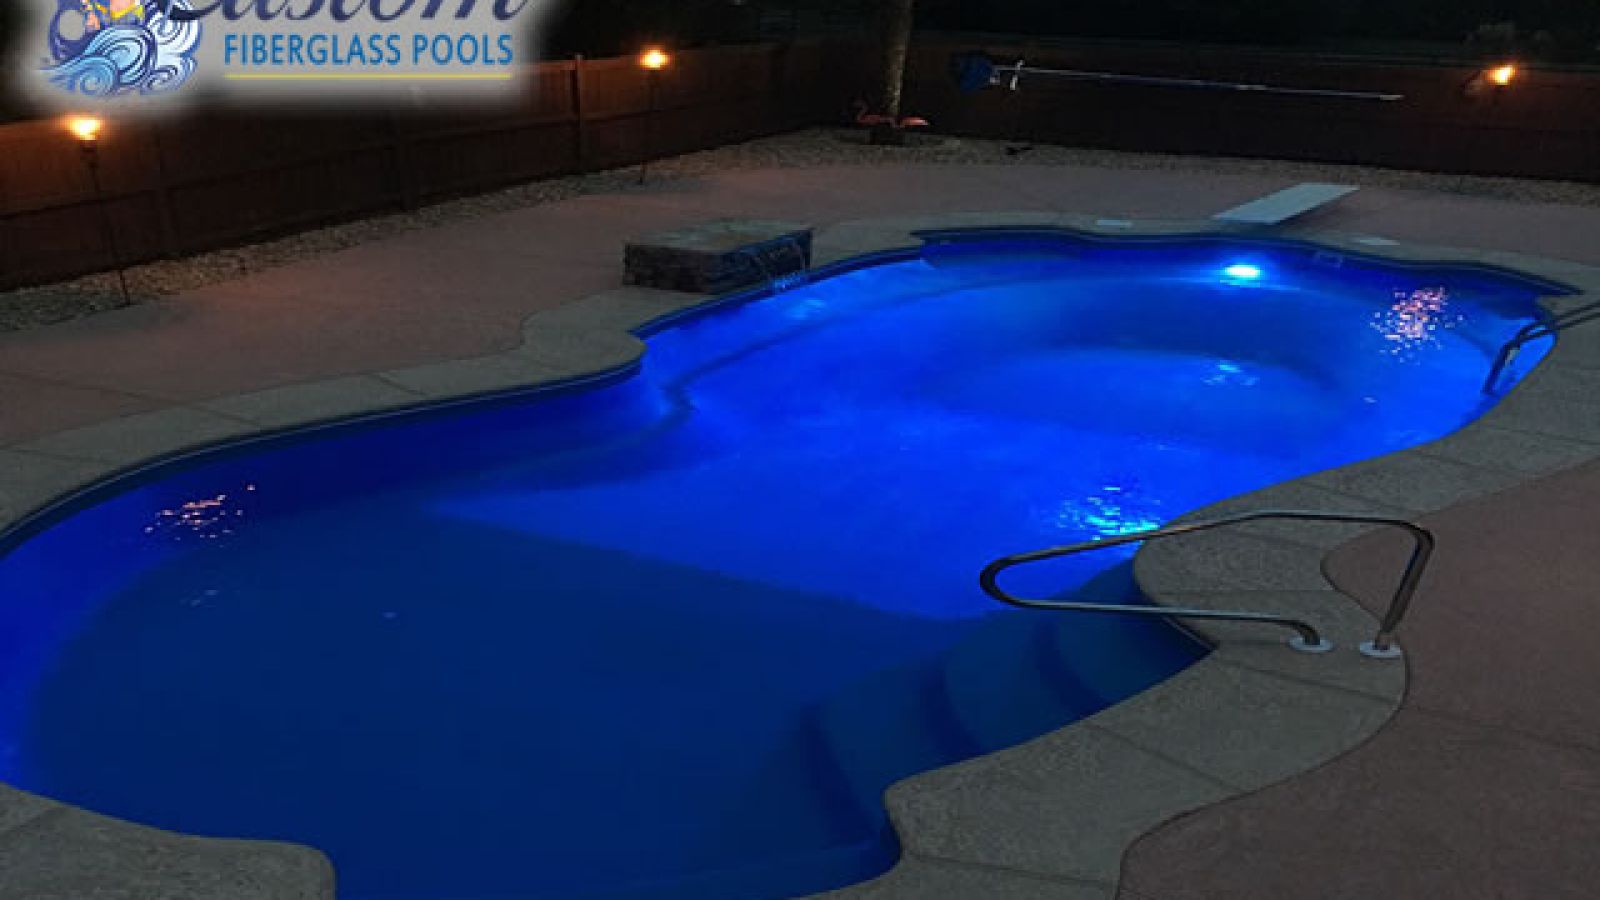 Atlantic Deep Fiberglass Pool, a spacious and exciting addition to a Clarksville, TN backyard